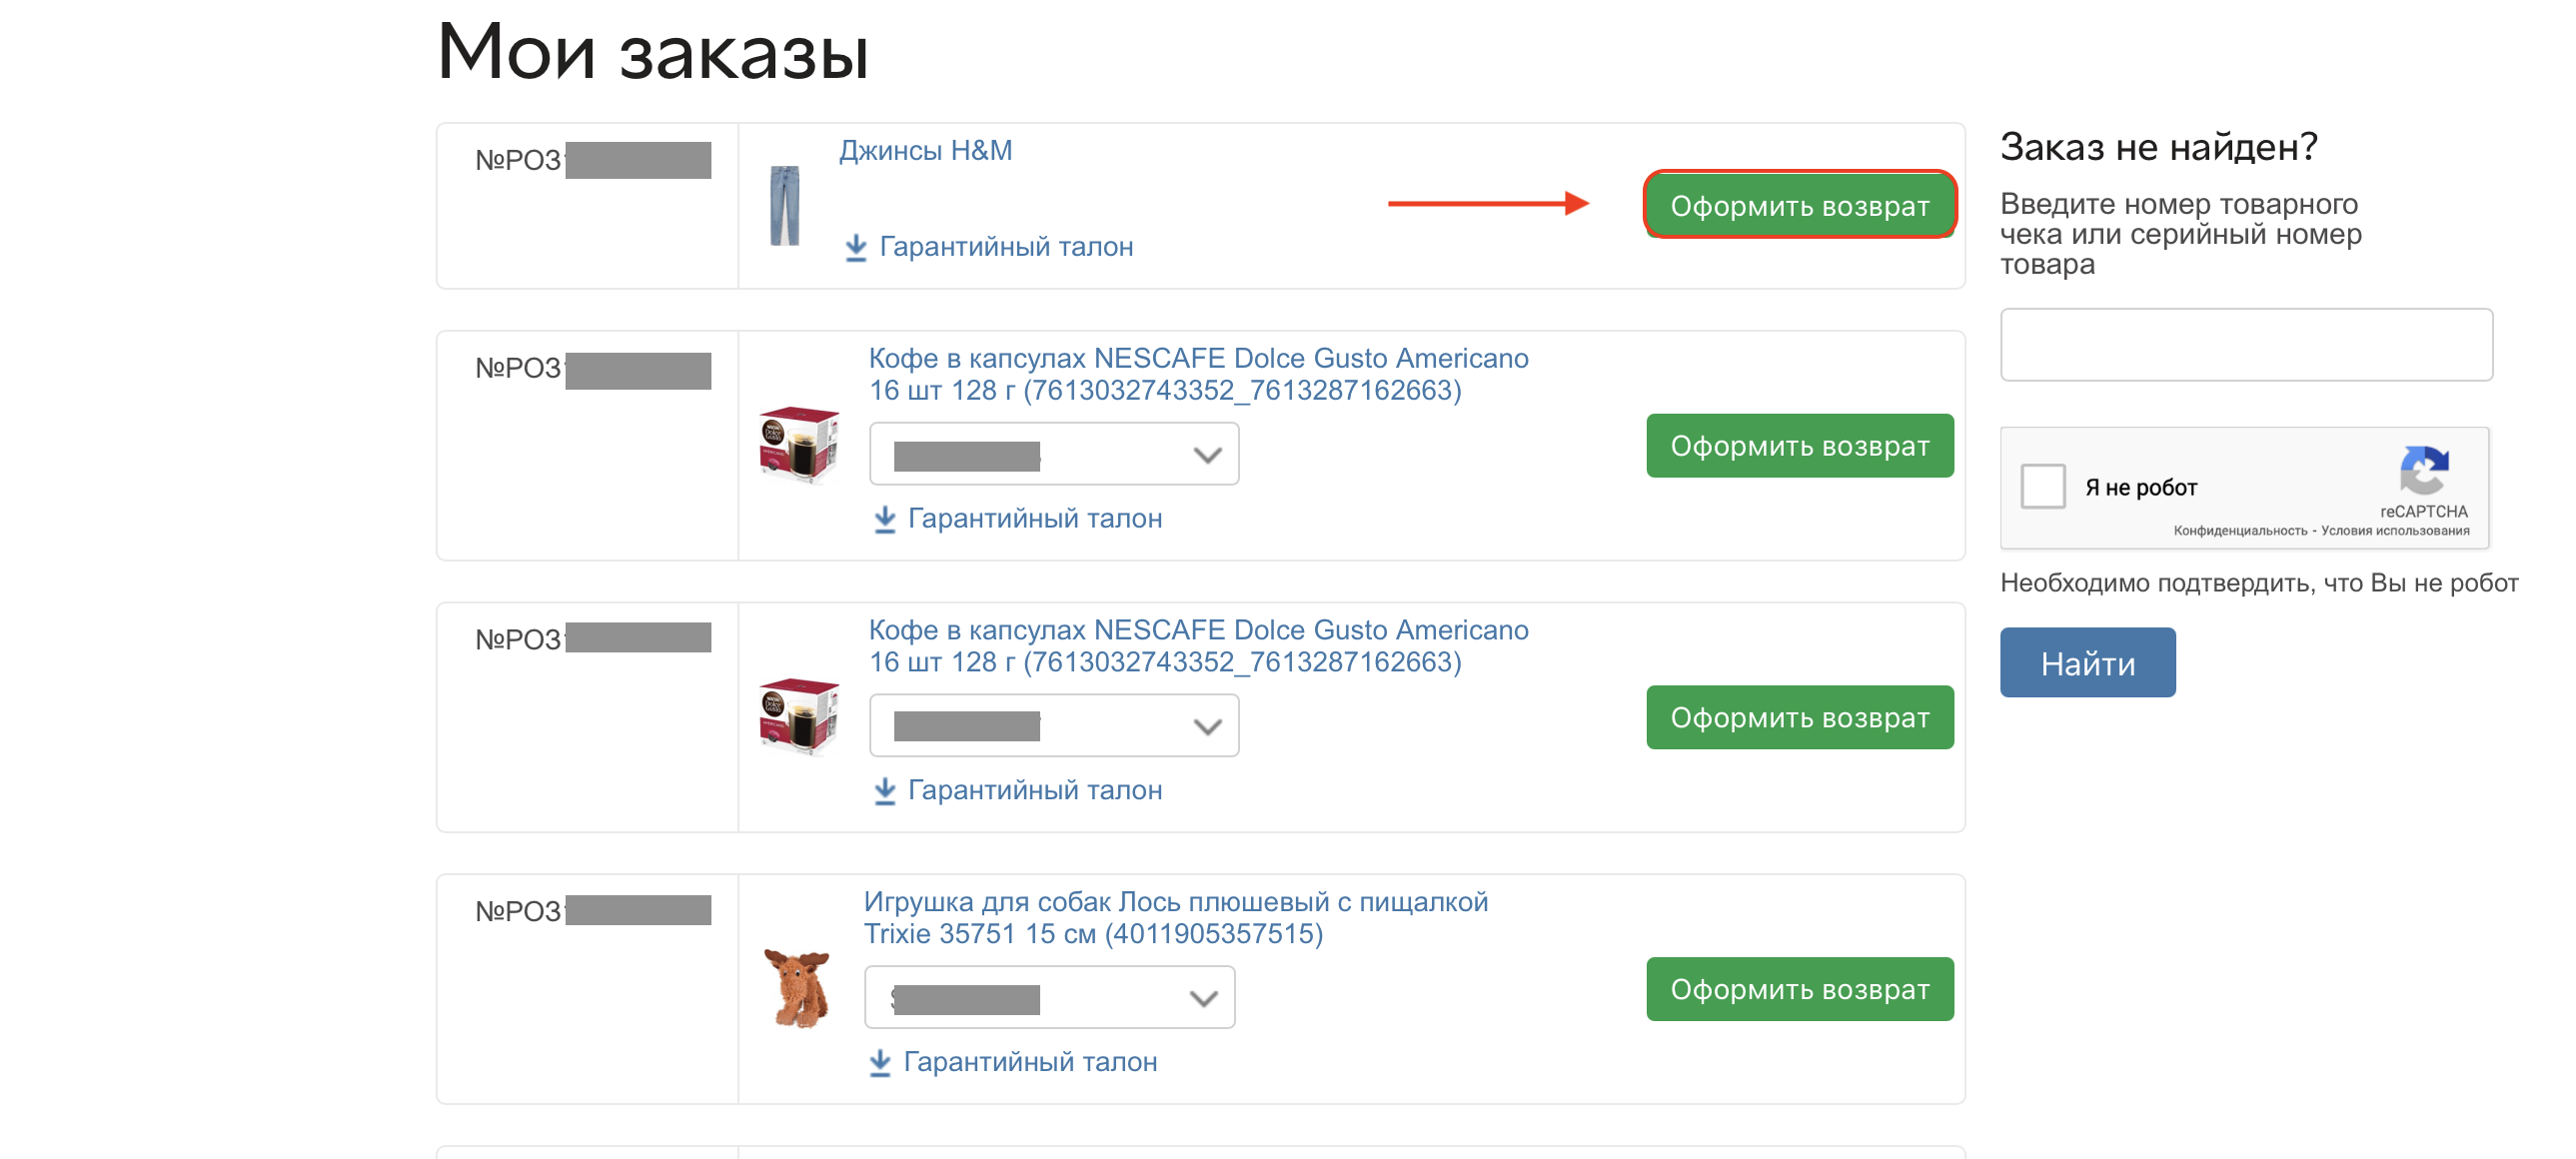 How To Return The Order To Rozetka Step By Step